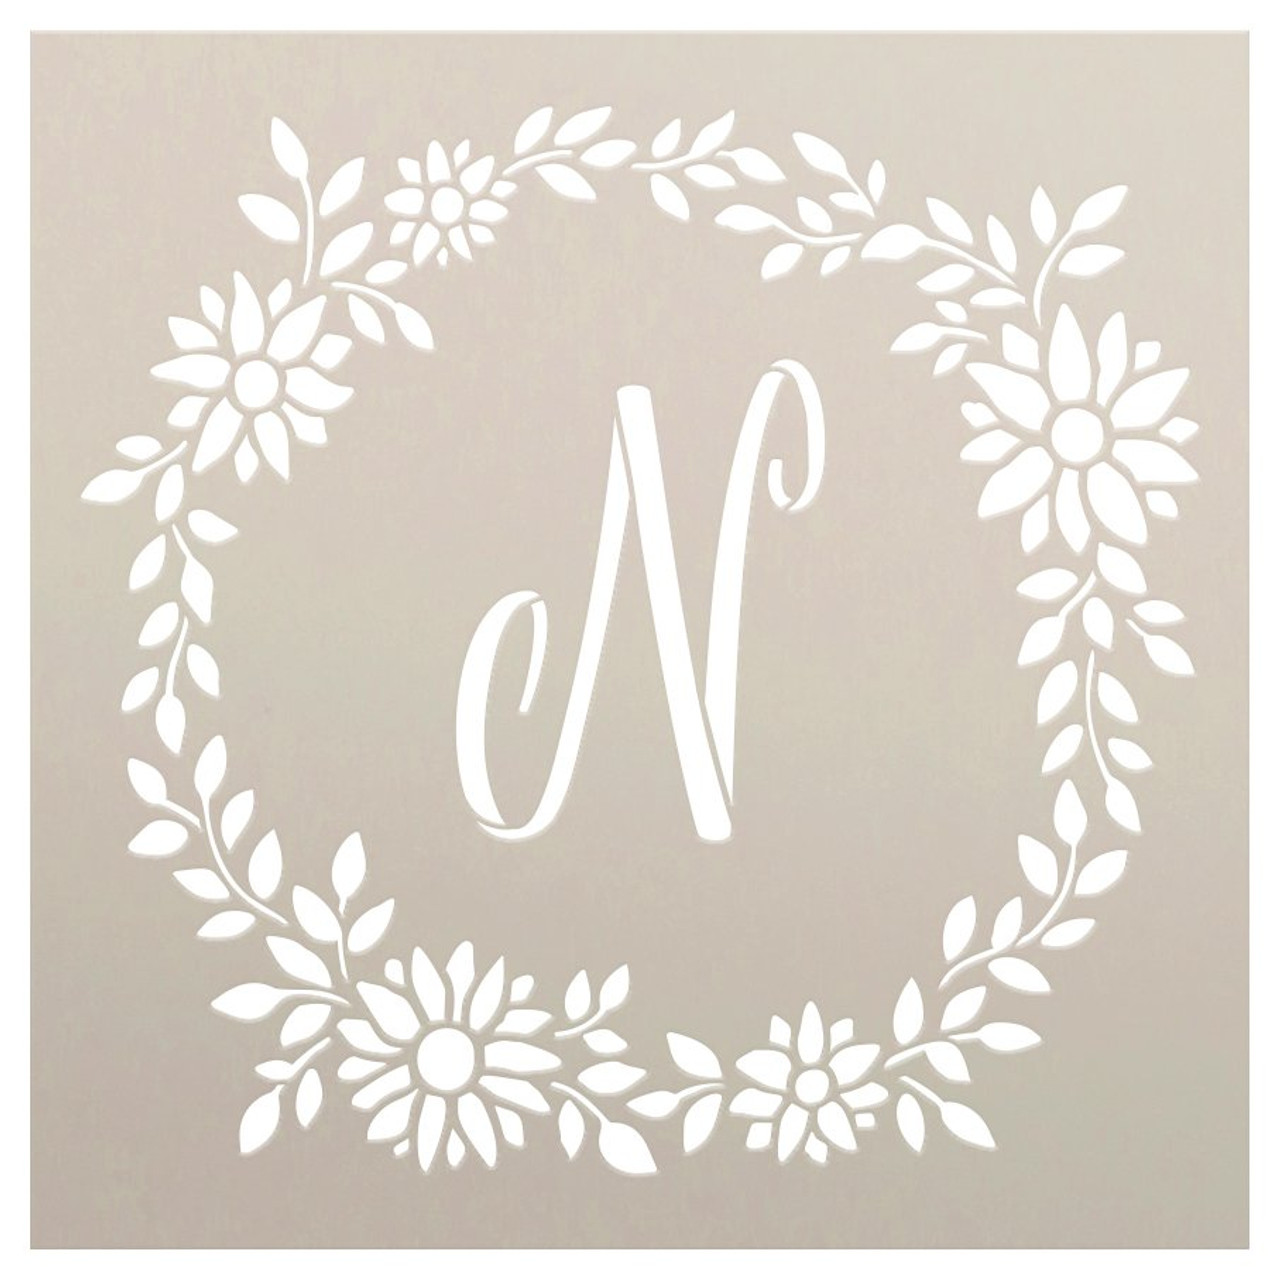 Daisy Script Monogram Stencil with Wreath by StudioR12 | DIY Bohemian Home Decor | Craft & Paint Boho Wood Signs | Select Size & Letter